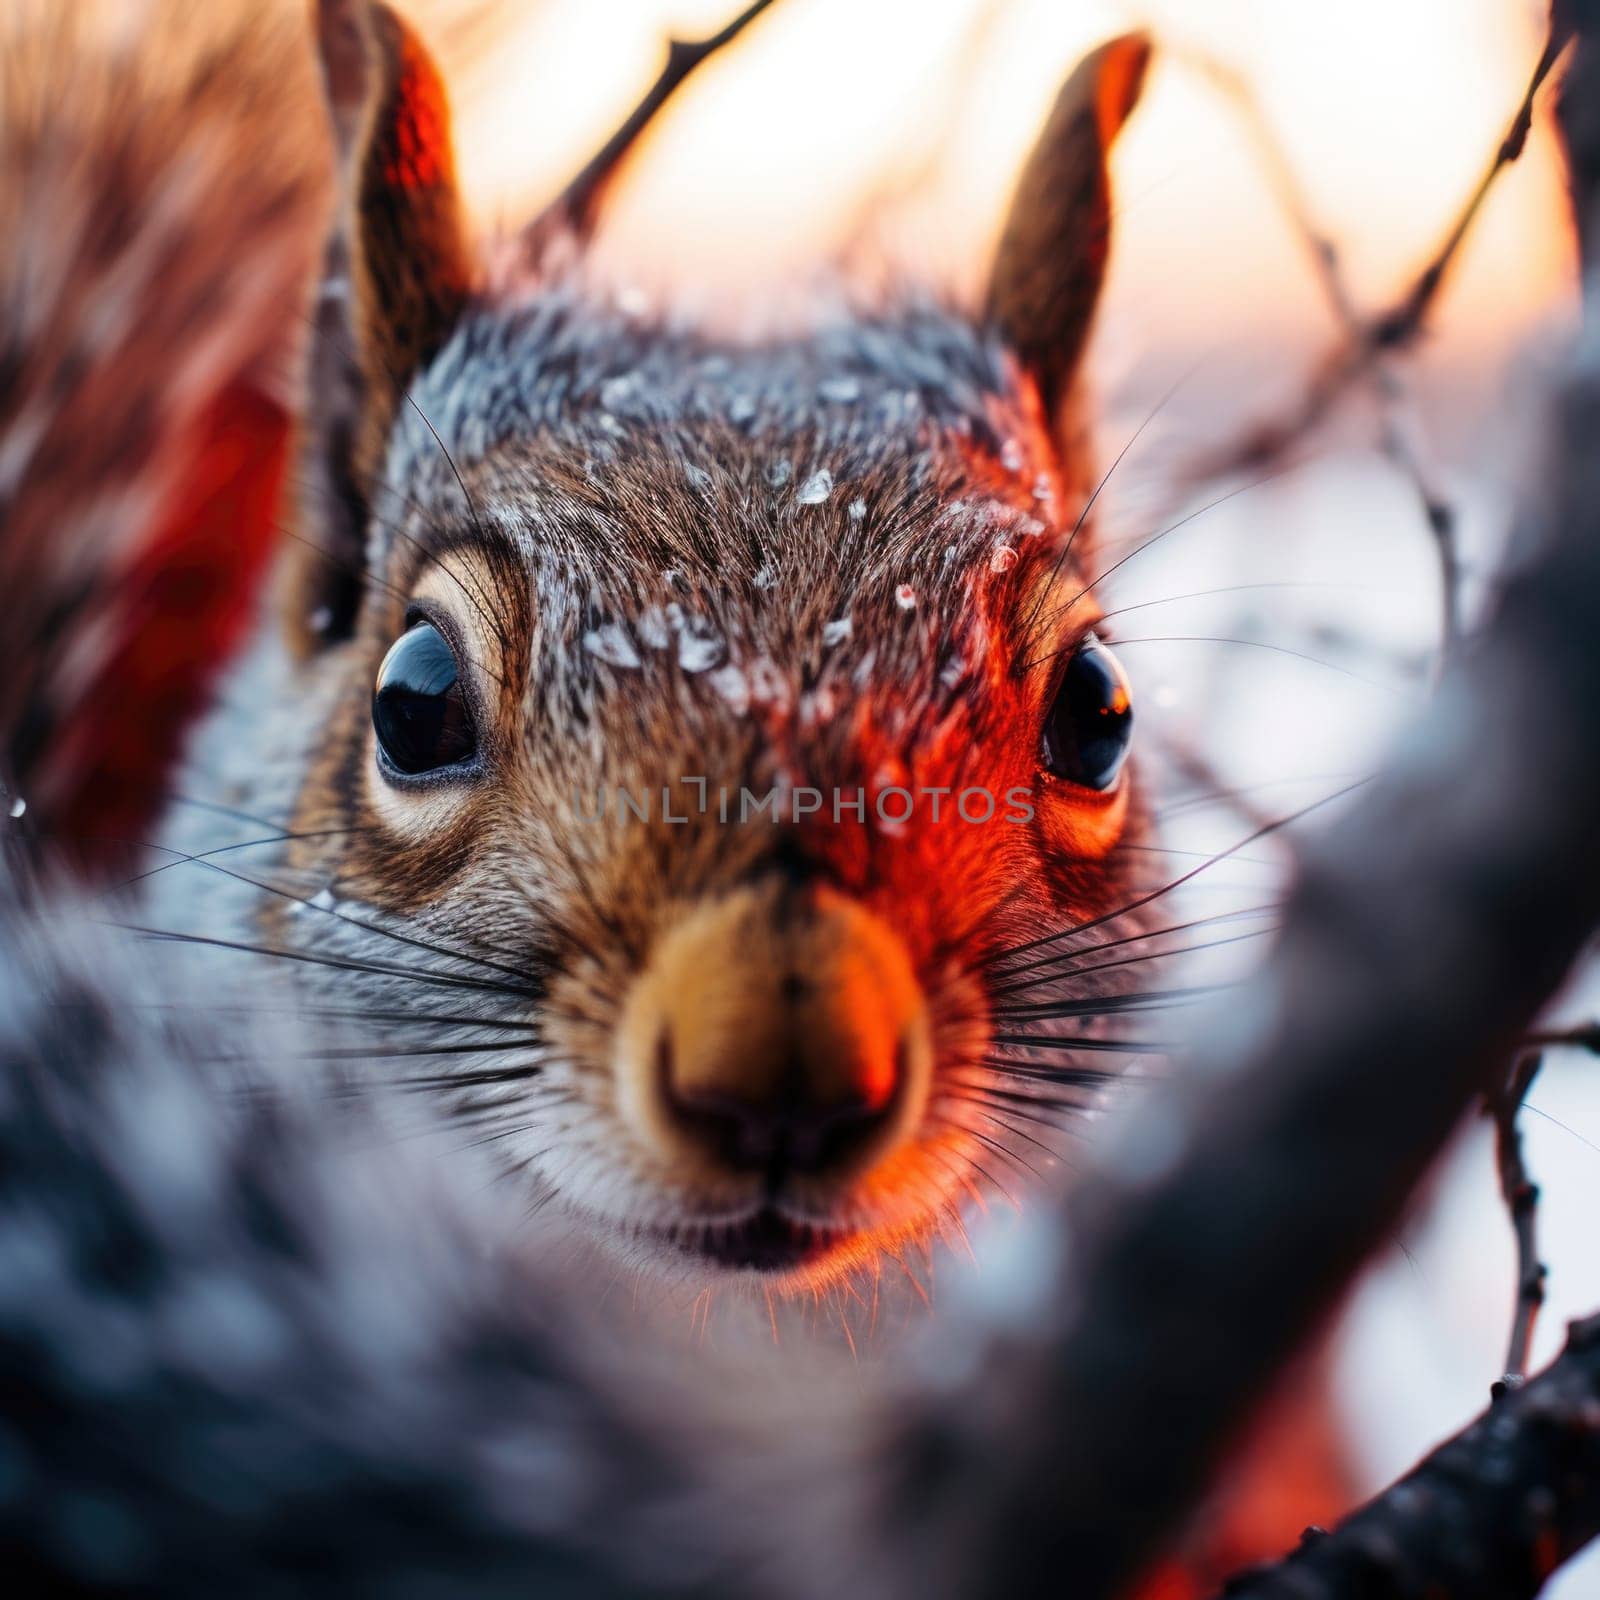 A close up of a squirrel with red eyes